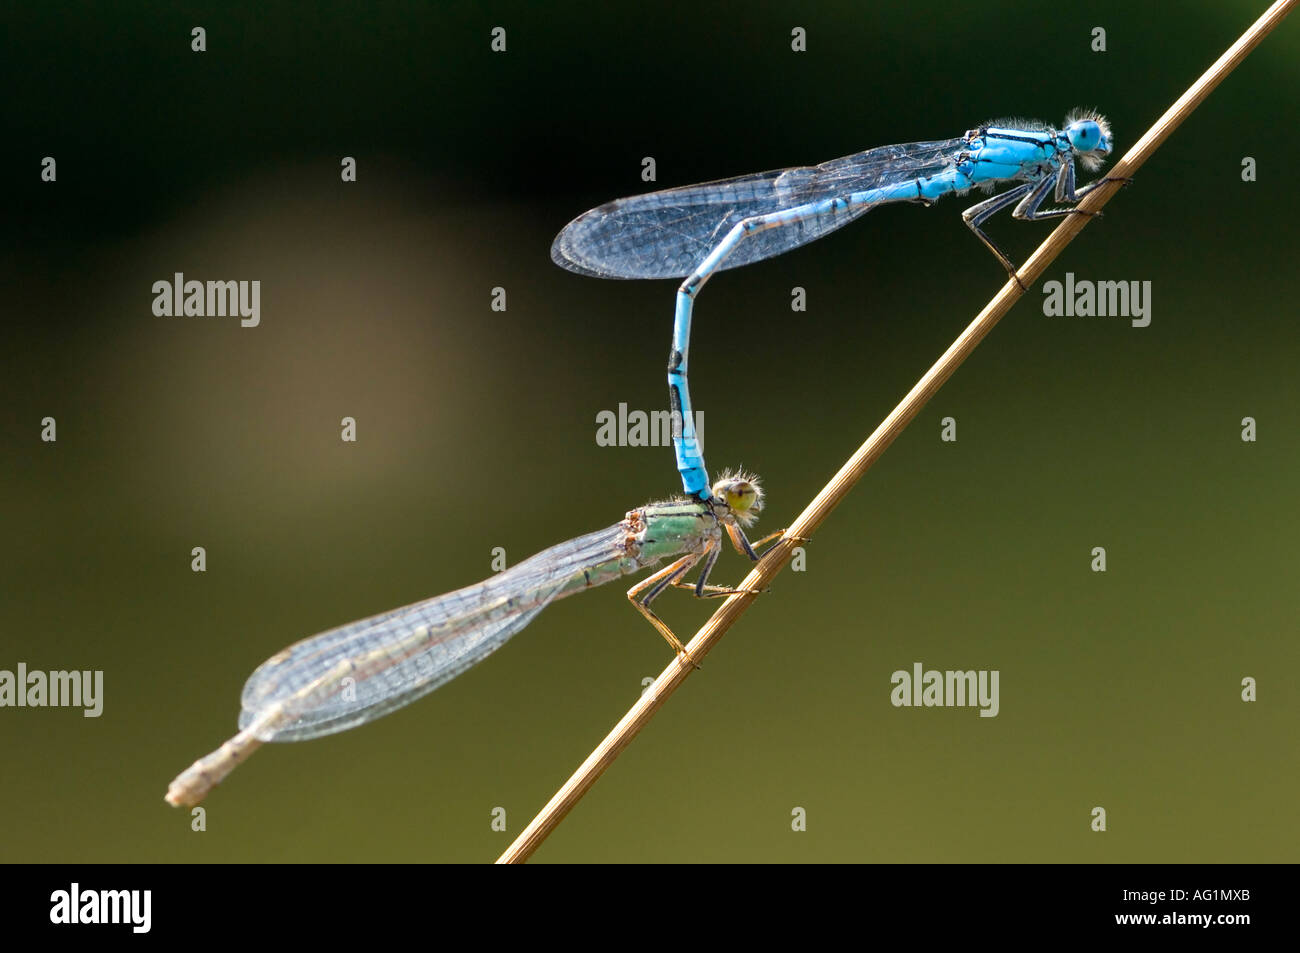 A pair of Common blue damselflies (anallagma cyathigerum) in the process of mating. Stock Photo